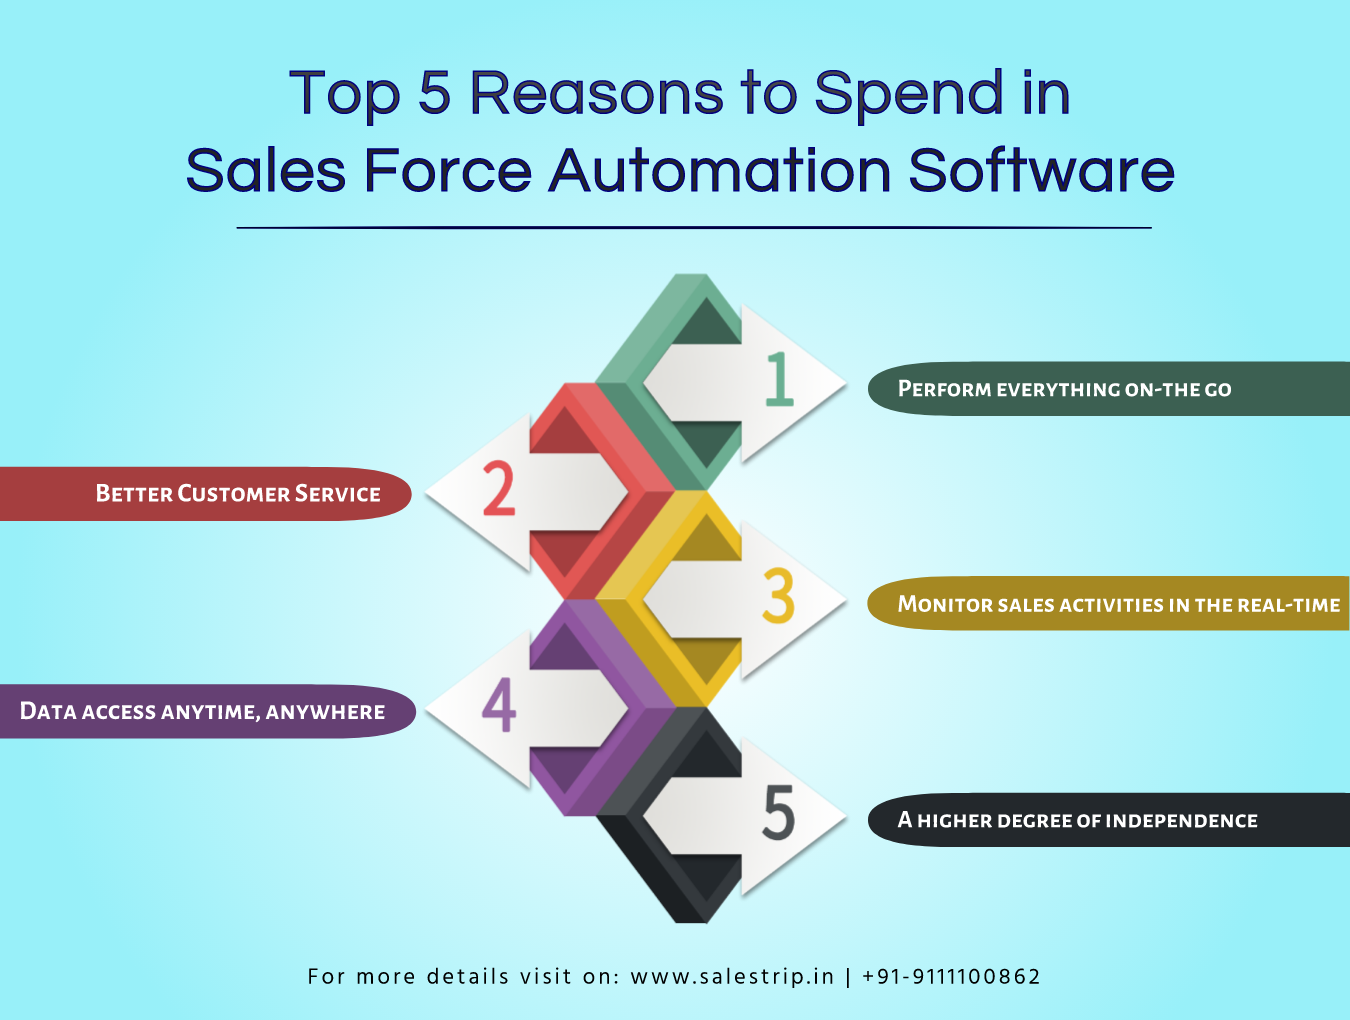 sales force automation software, Salestrip Sales Force Automation, Pharma SFA, MR Reporting Software